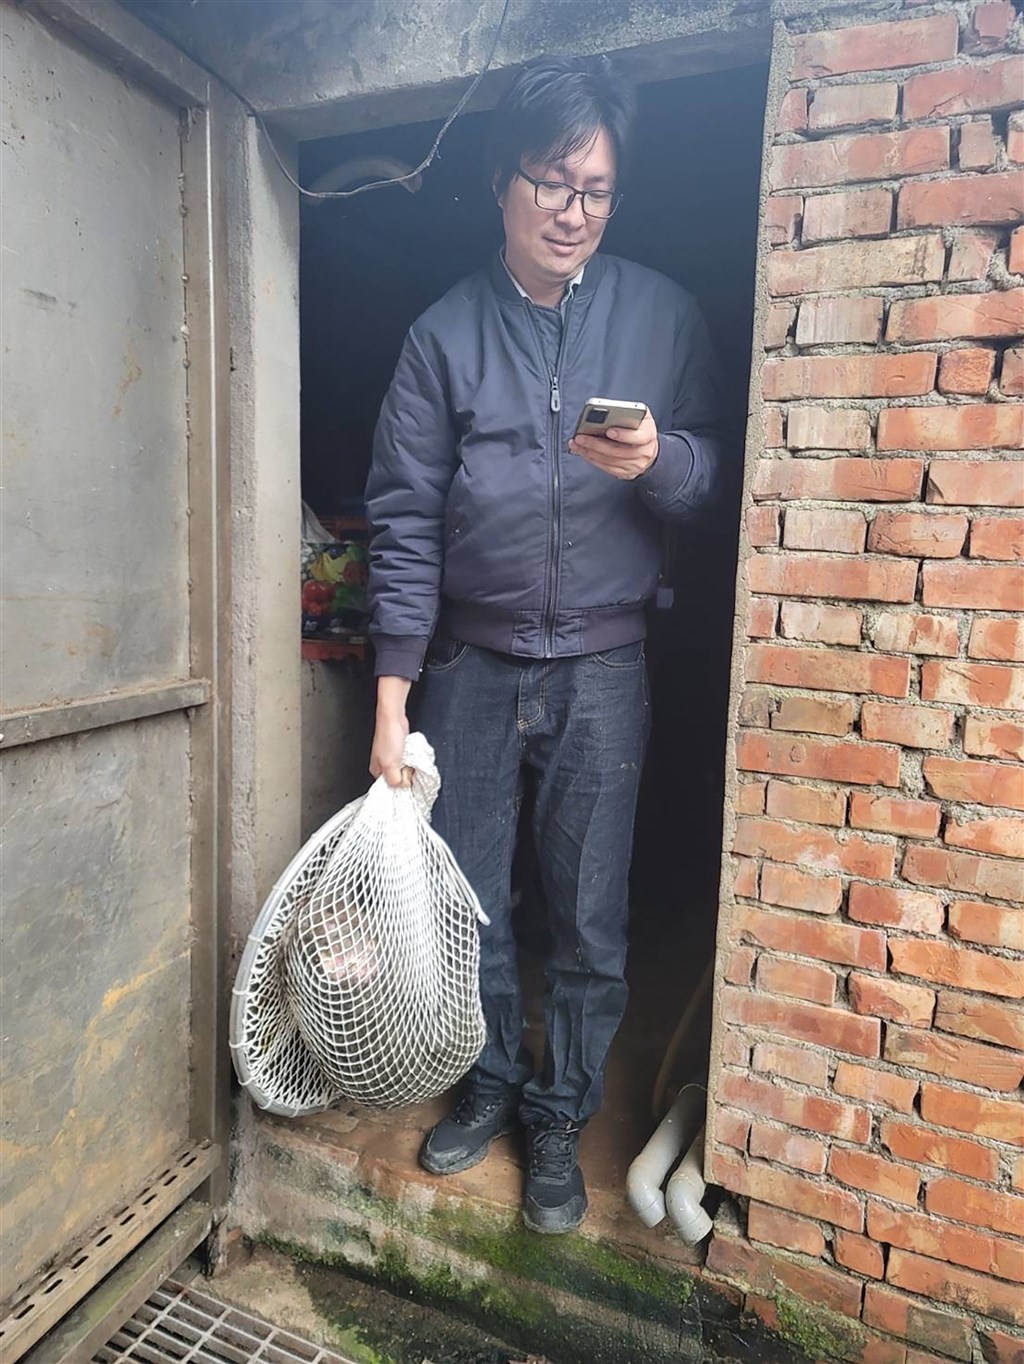 A man carries the caught baboon out of a residence in Taoyuan on Monday. Photo courtesy of a private contributor